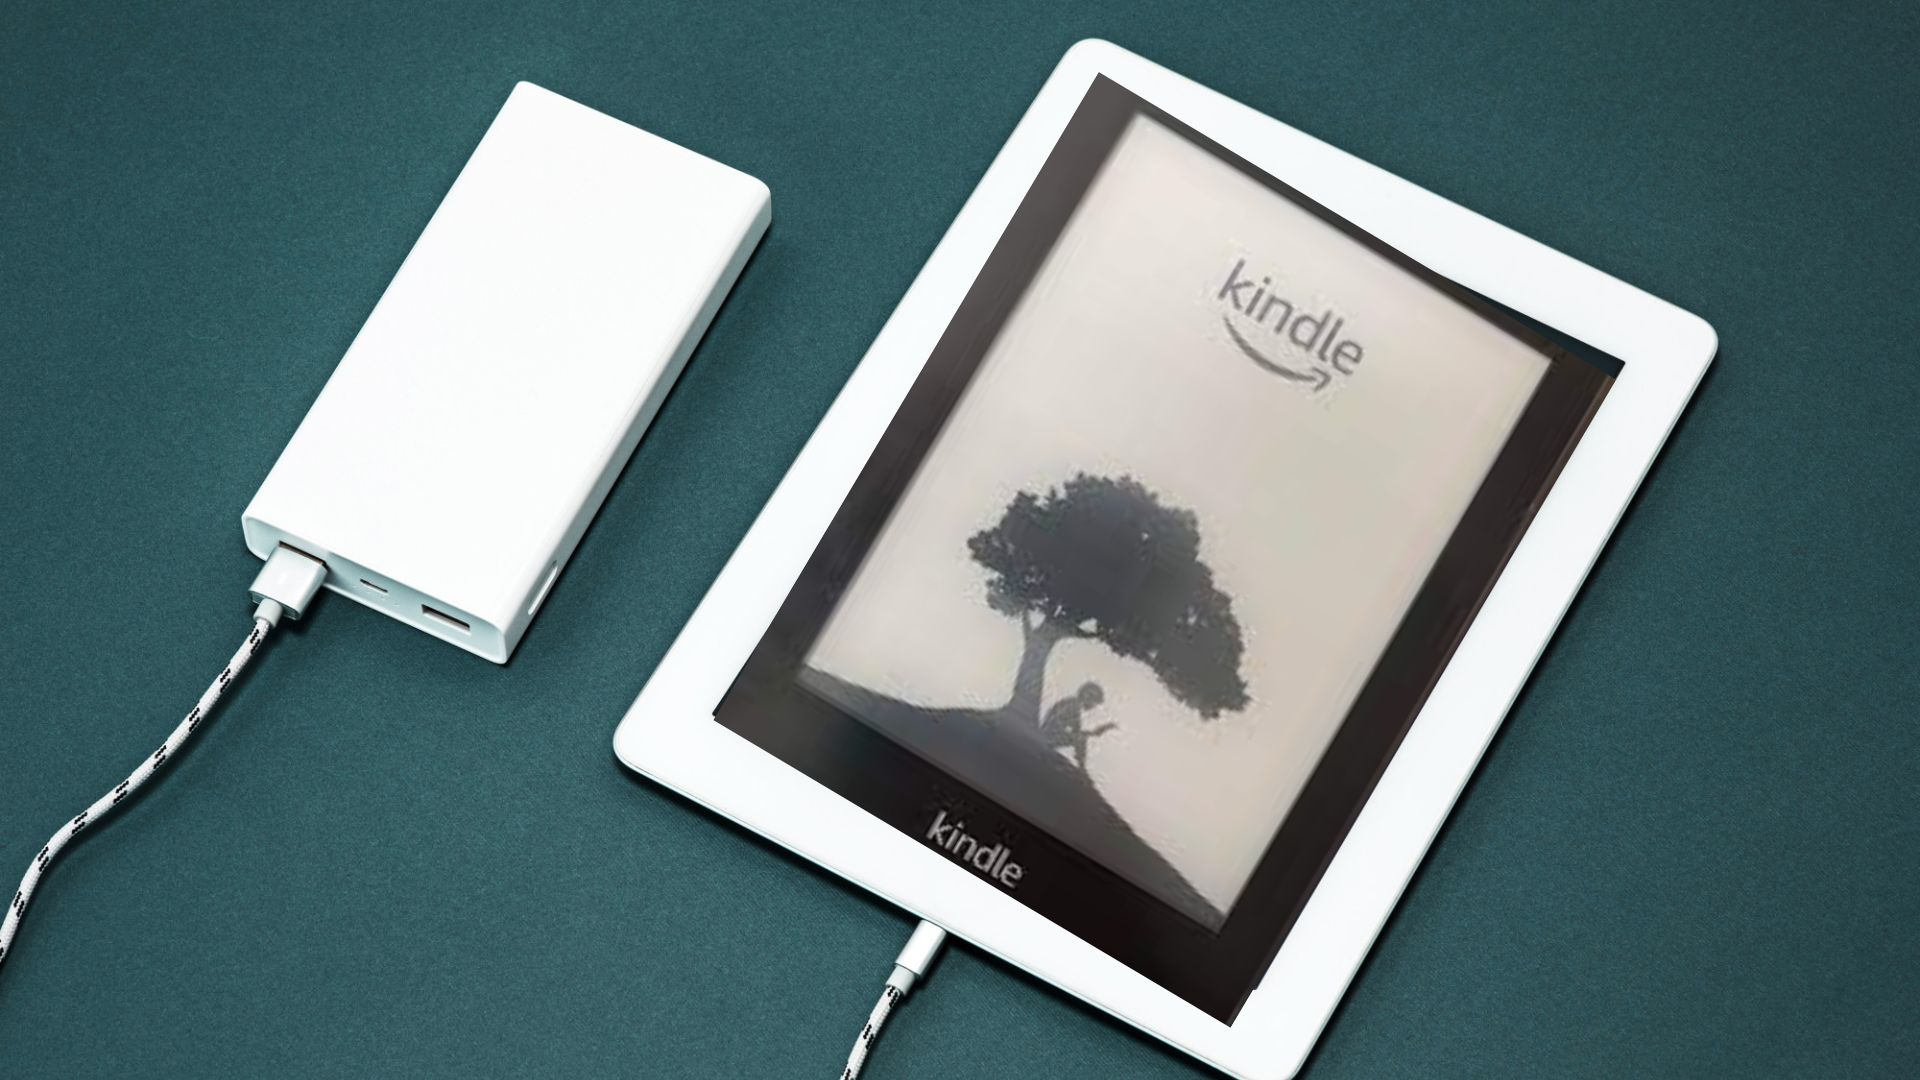 Charging your Kindle Device